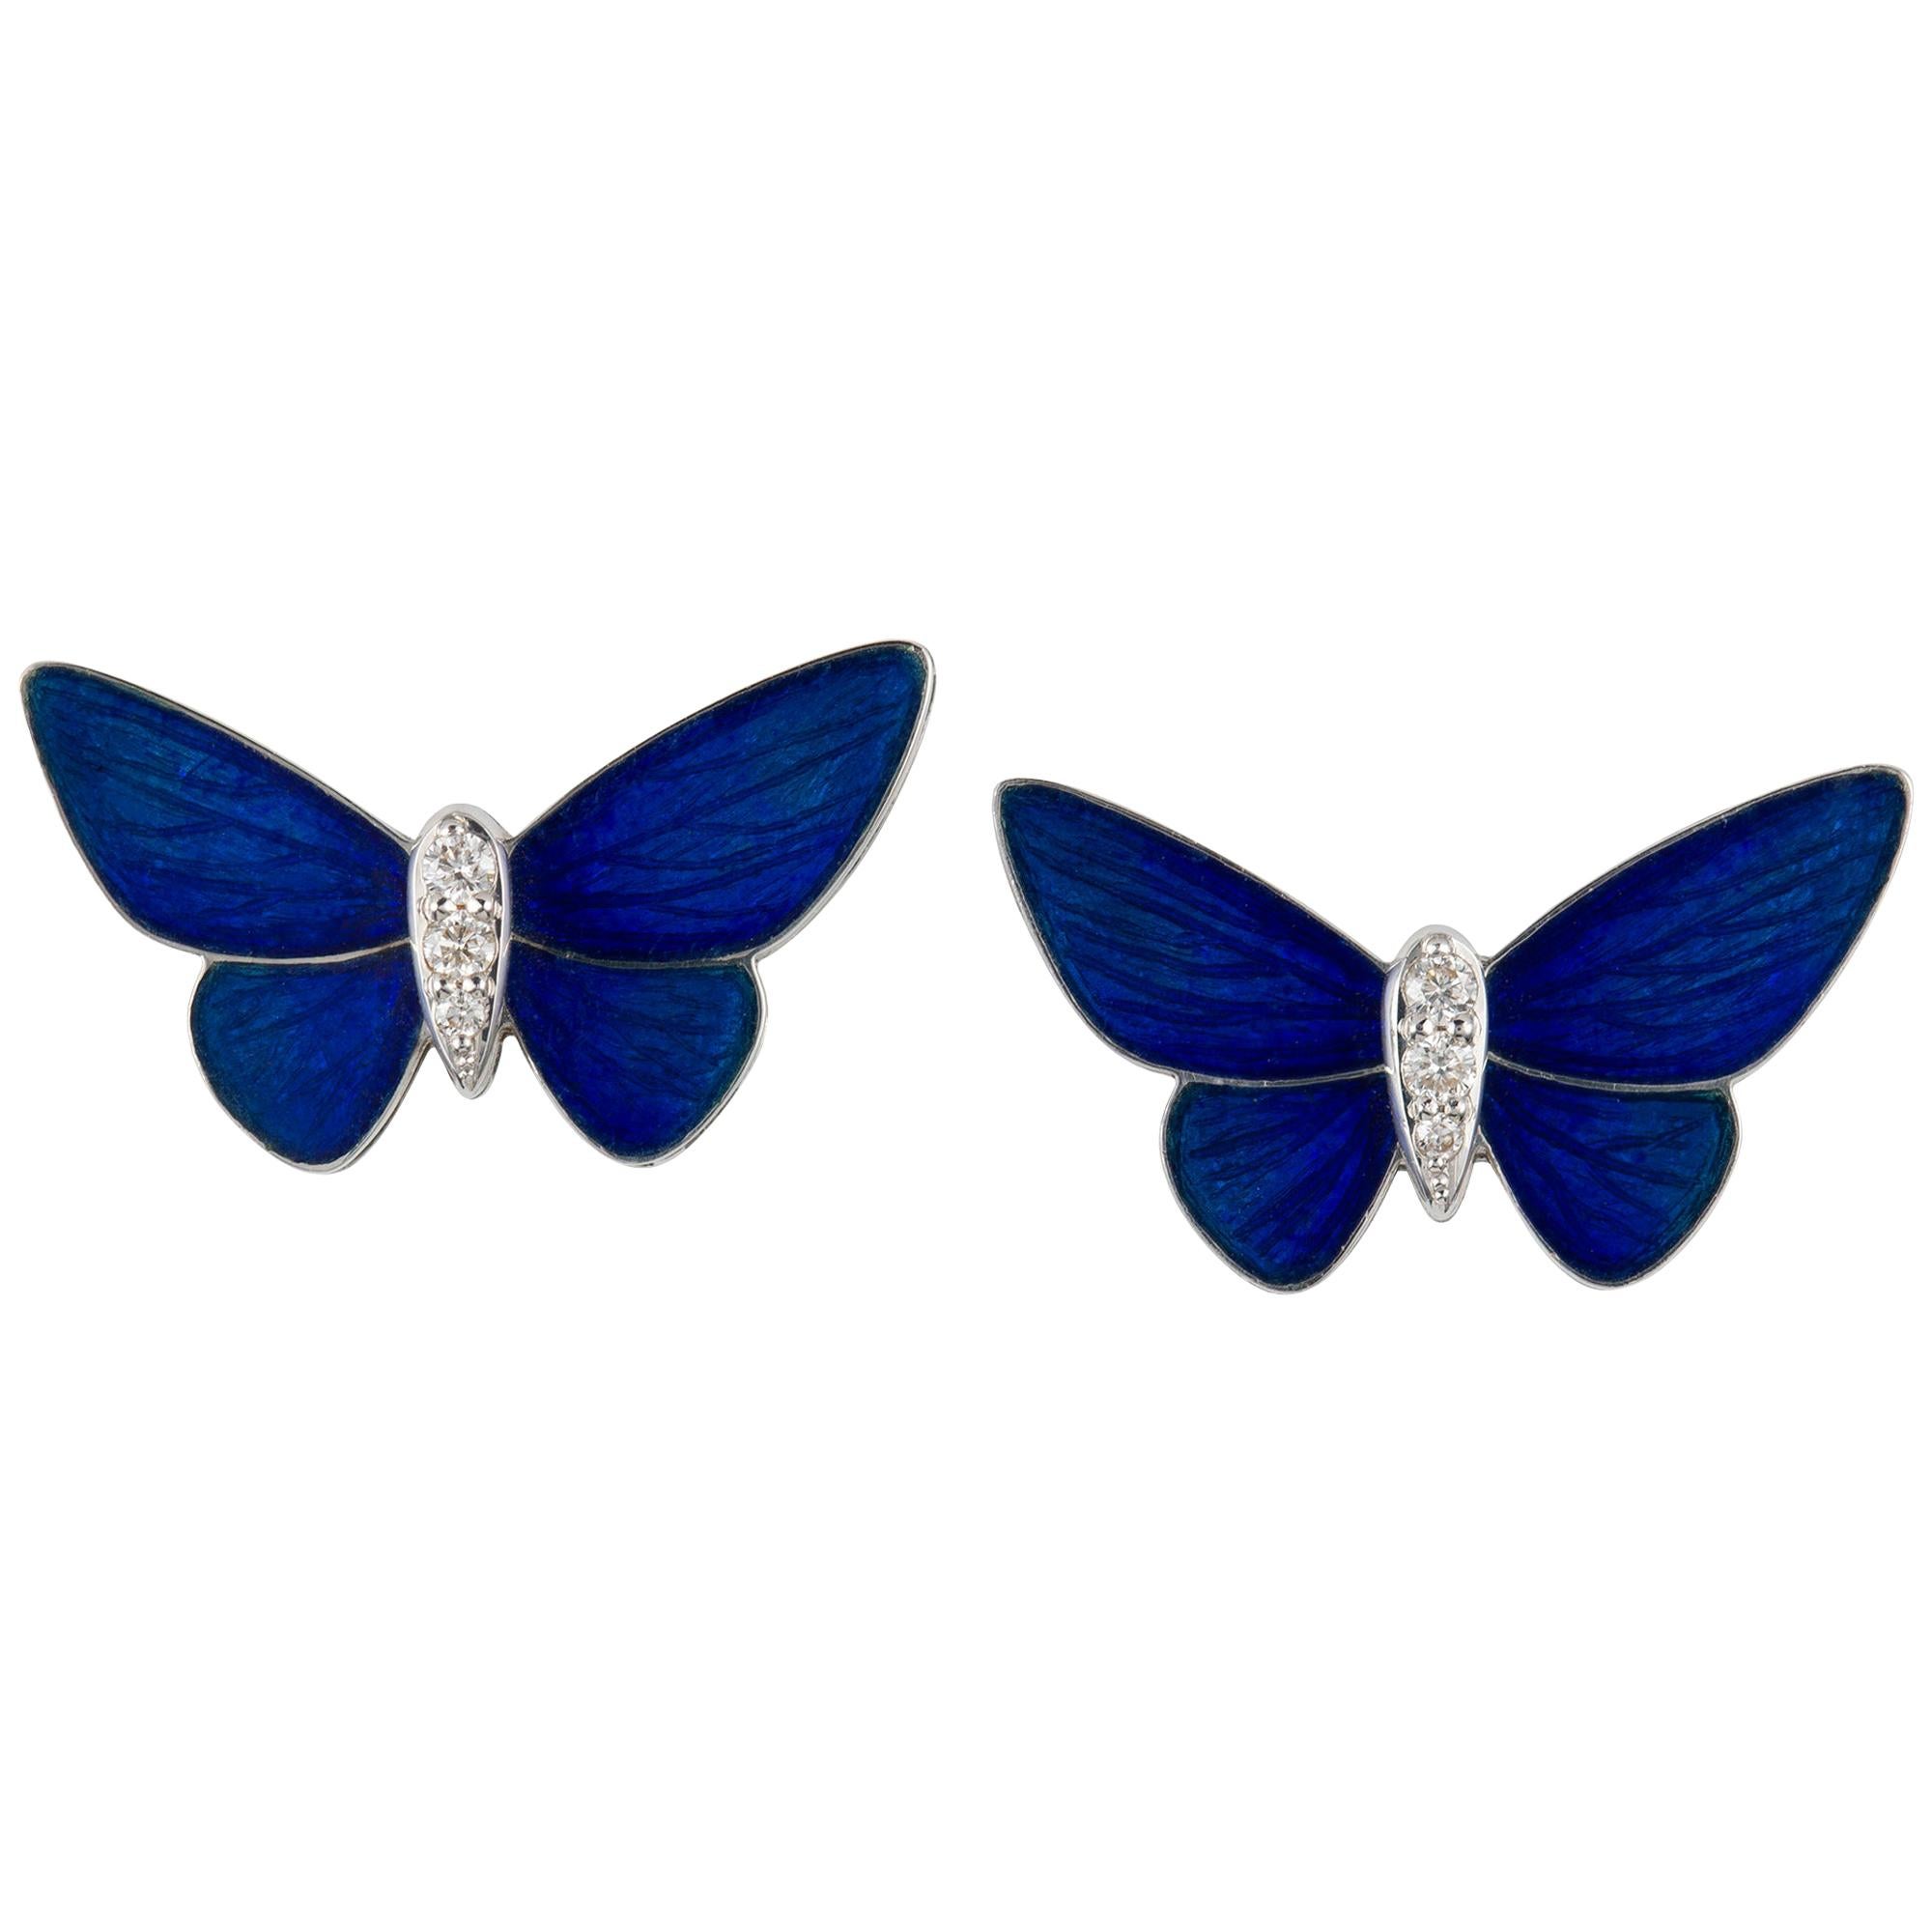 Pair Of Midnight-blue Butterfly Stud Earrings By Ilgiz F For Sale